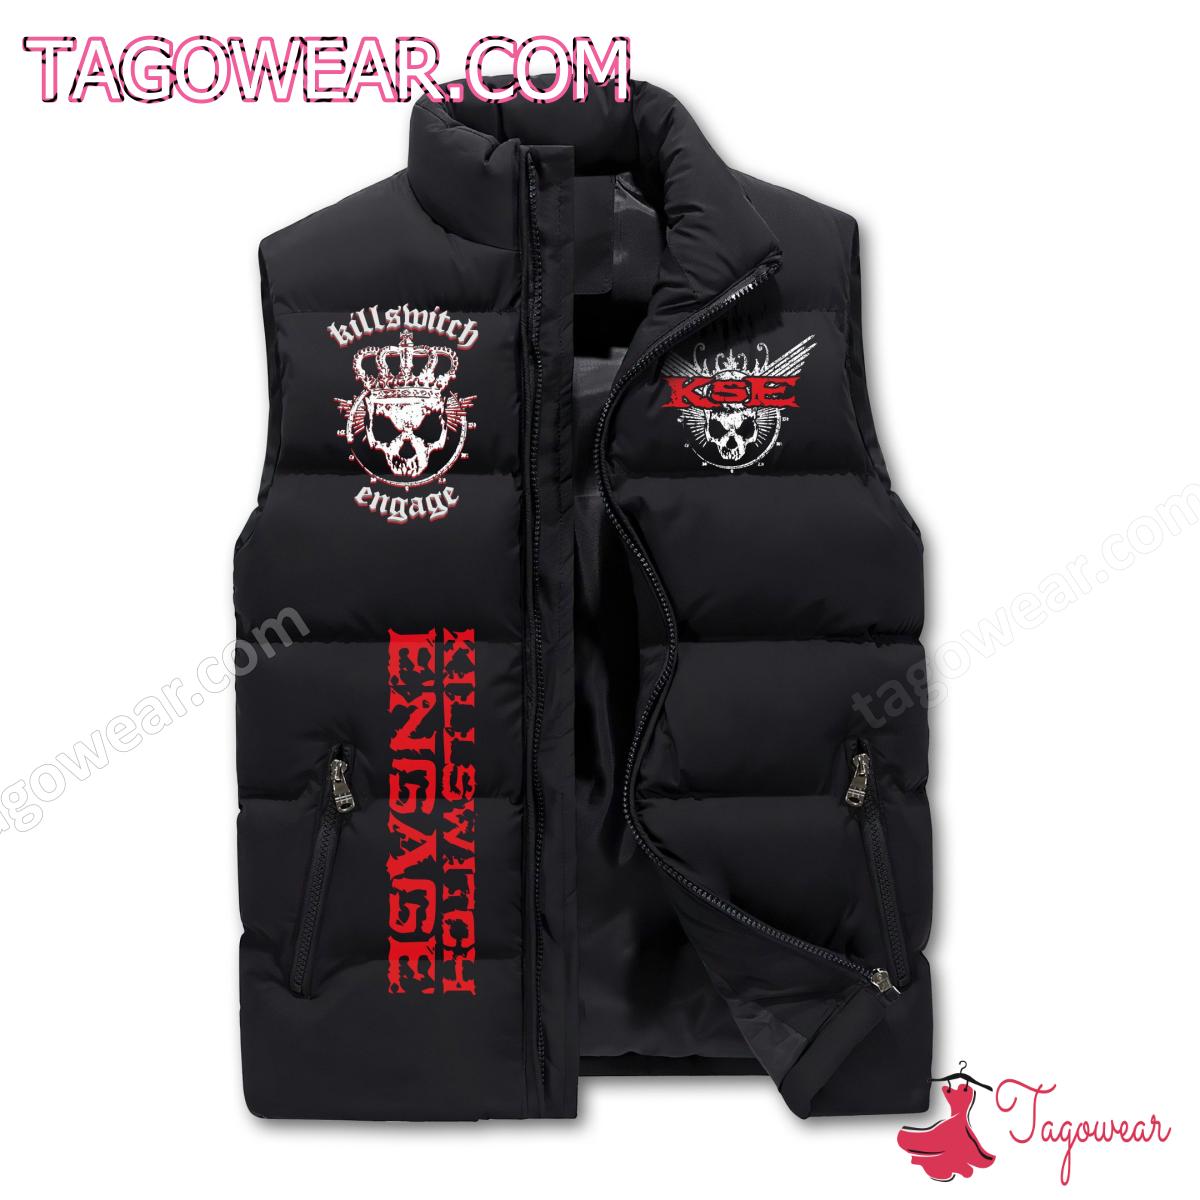 Killswitch Engage When Darkness Falls We Are Reborn Puffer Sleeveless Jacket a